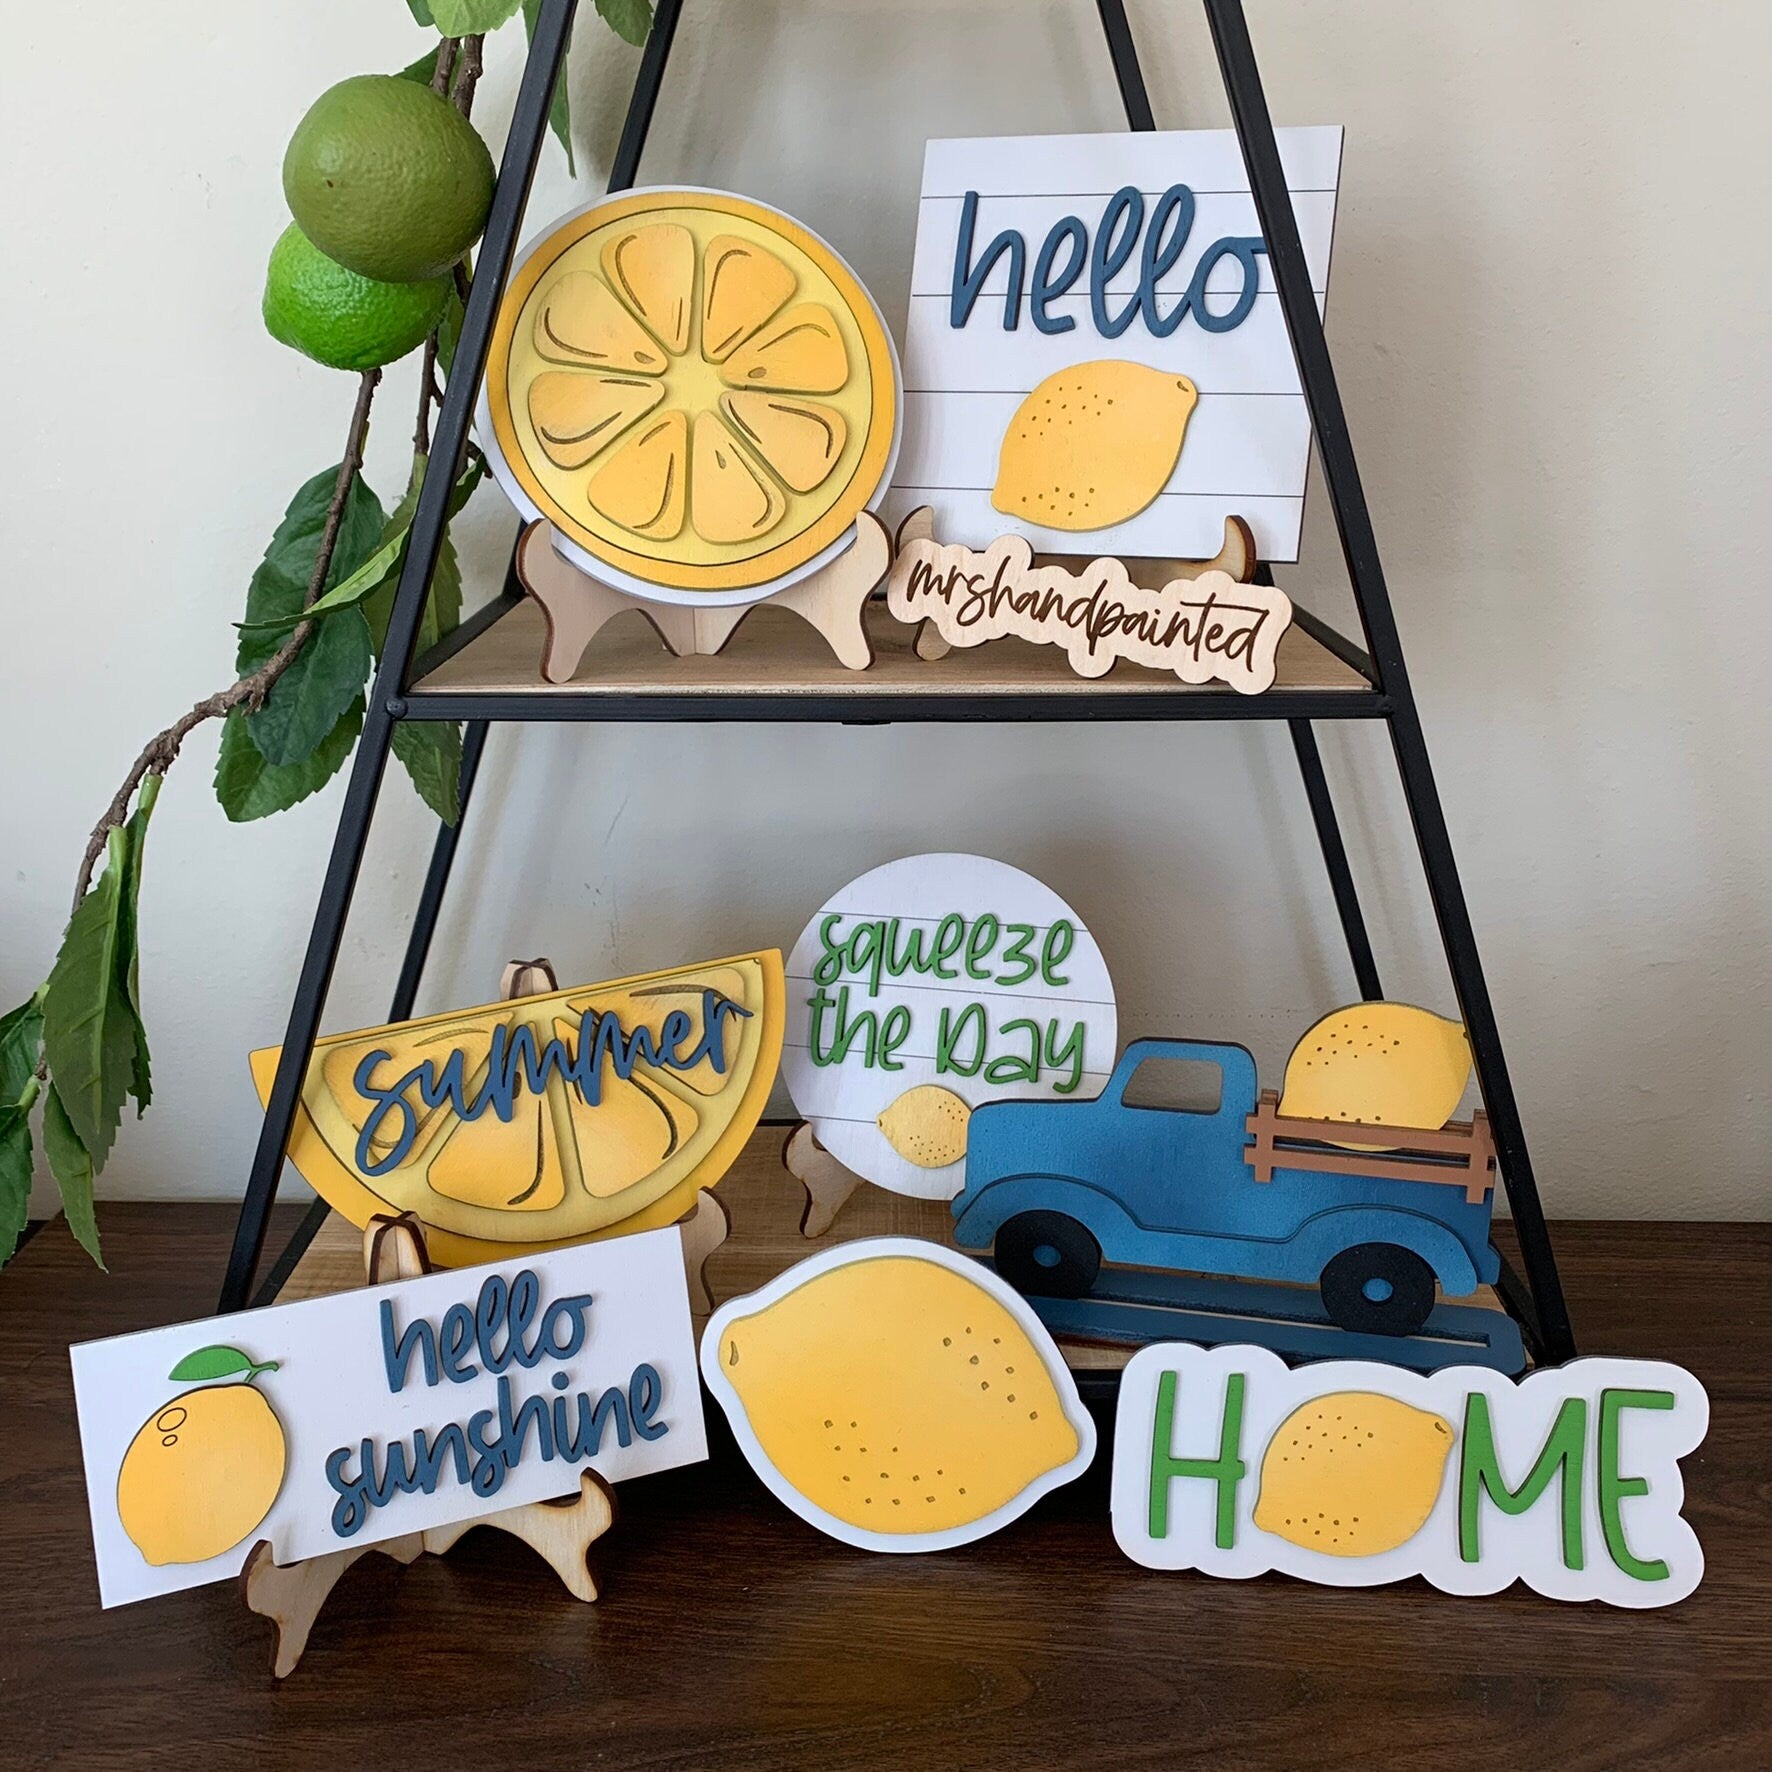 Summer Lemons Tiered Tray Decor - Laser Cut Wood Painted